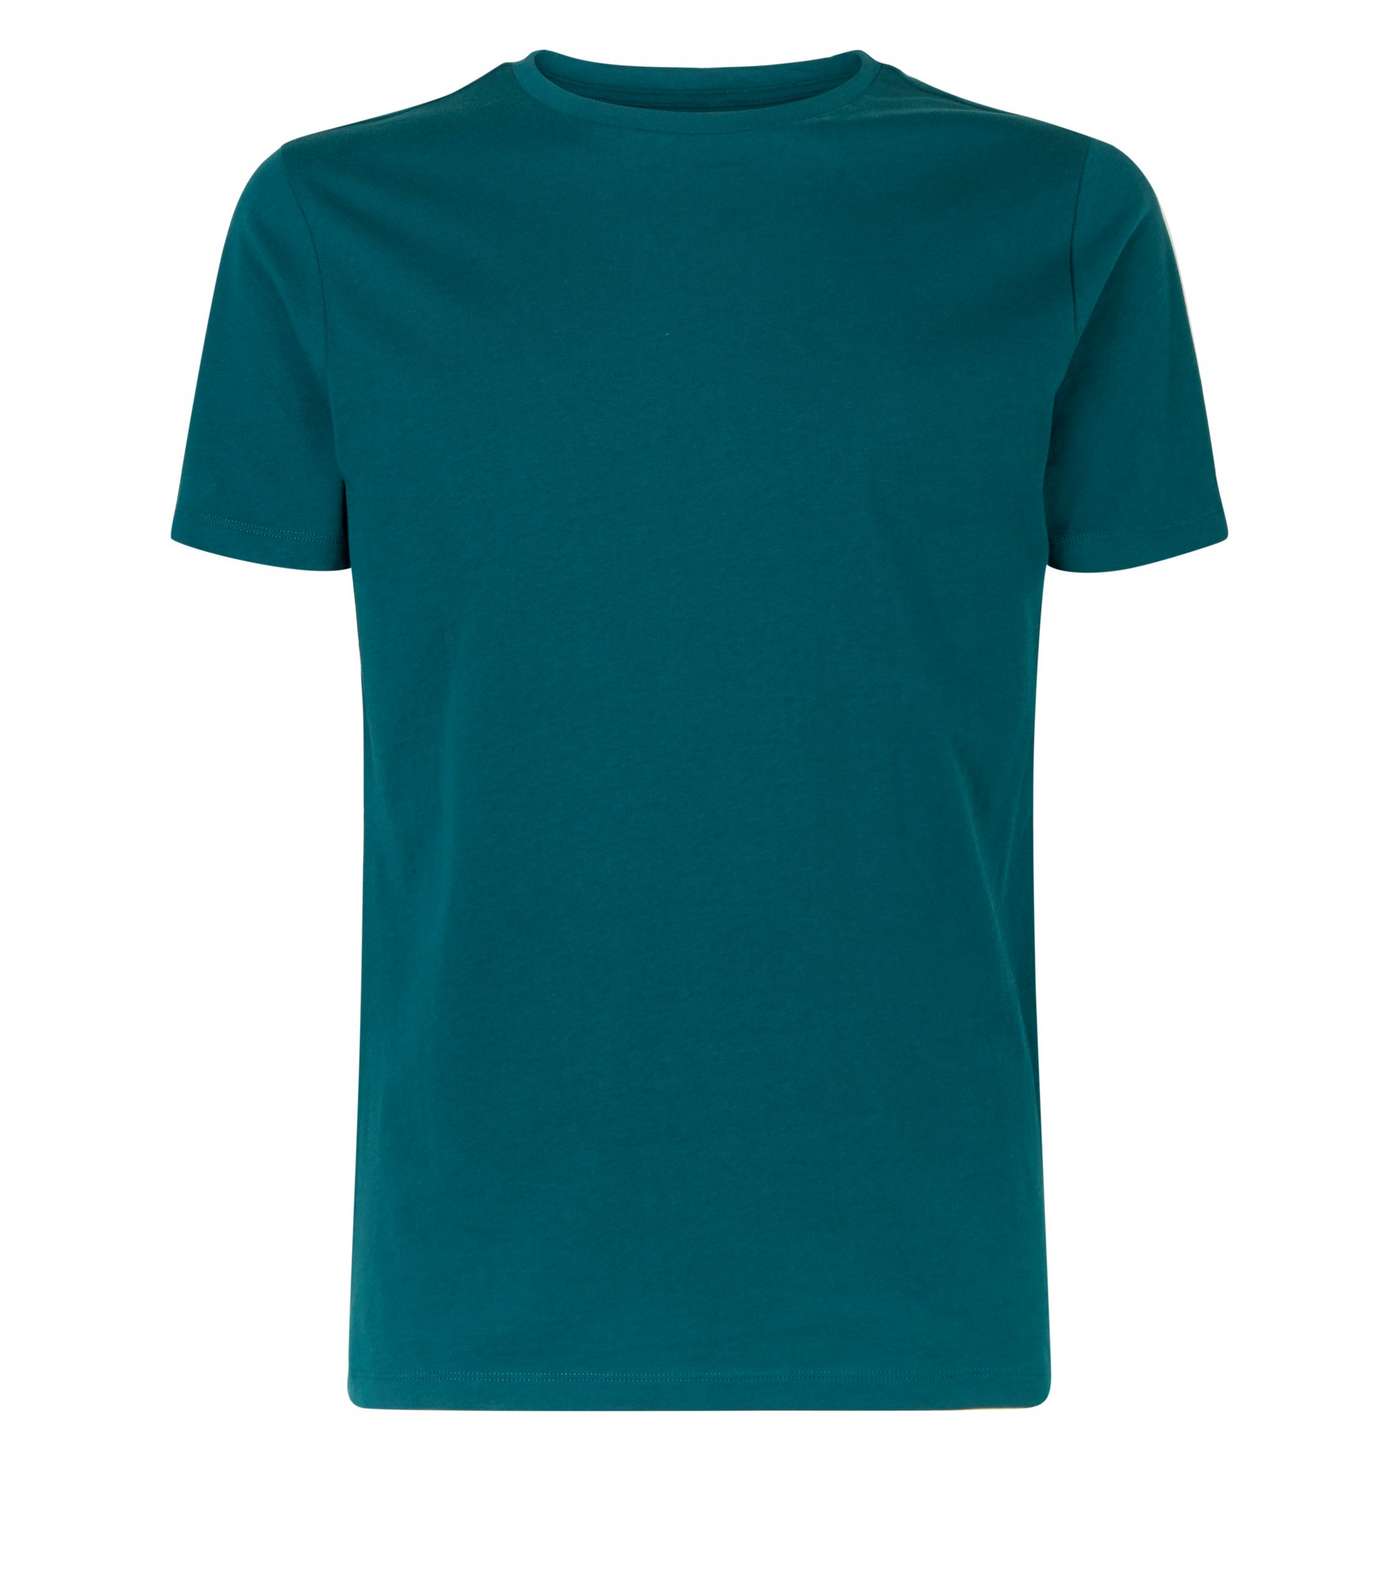 Teal Short Sleeve Muscle Fit T-Shirt Image 4